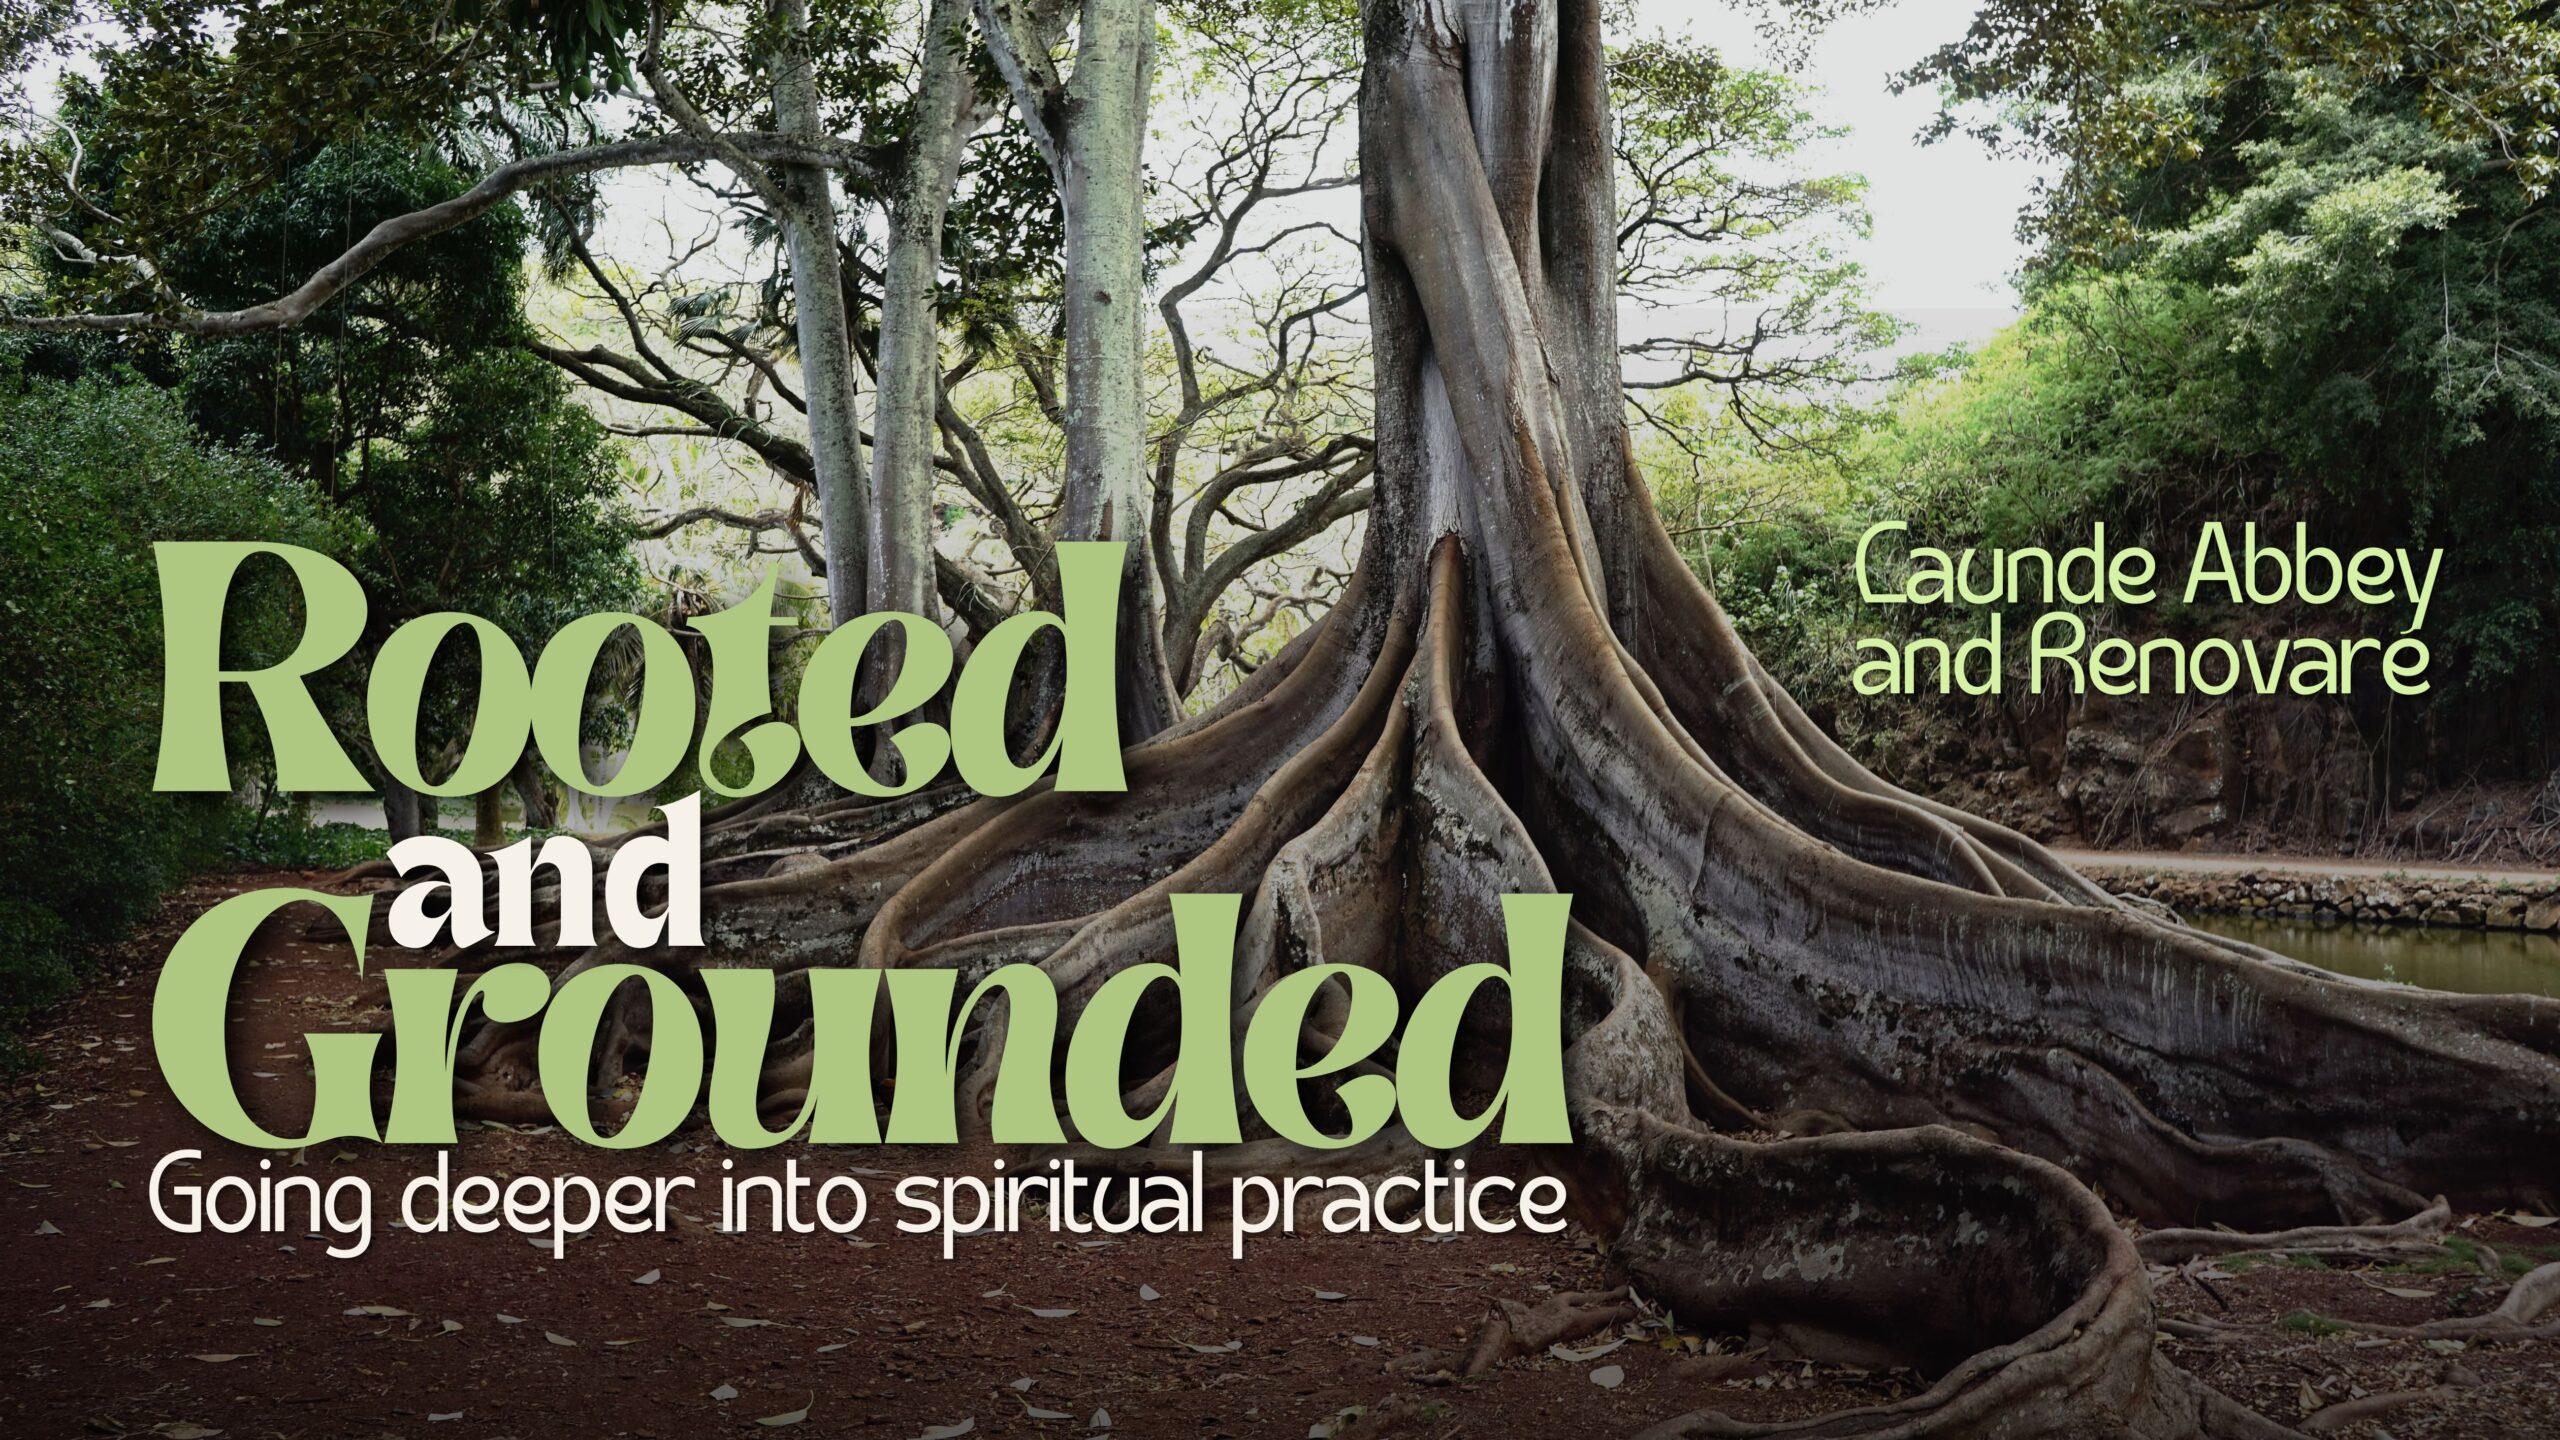 Rooted and Grounded: Going Deeper Into Spiritual Practice